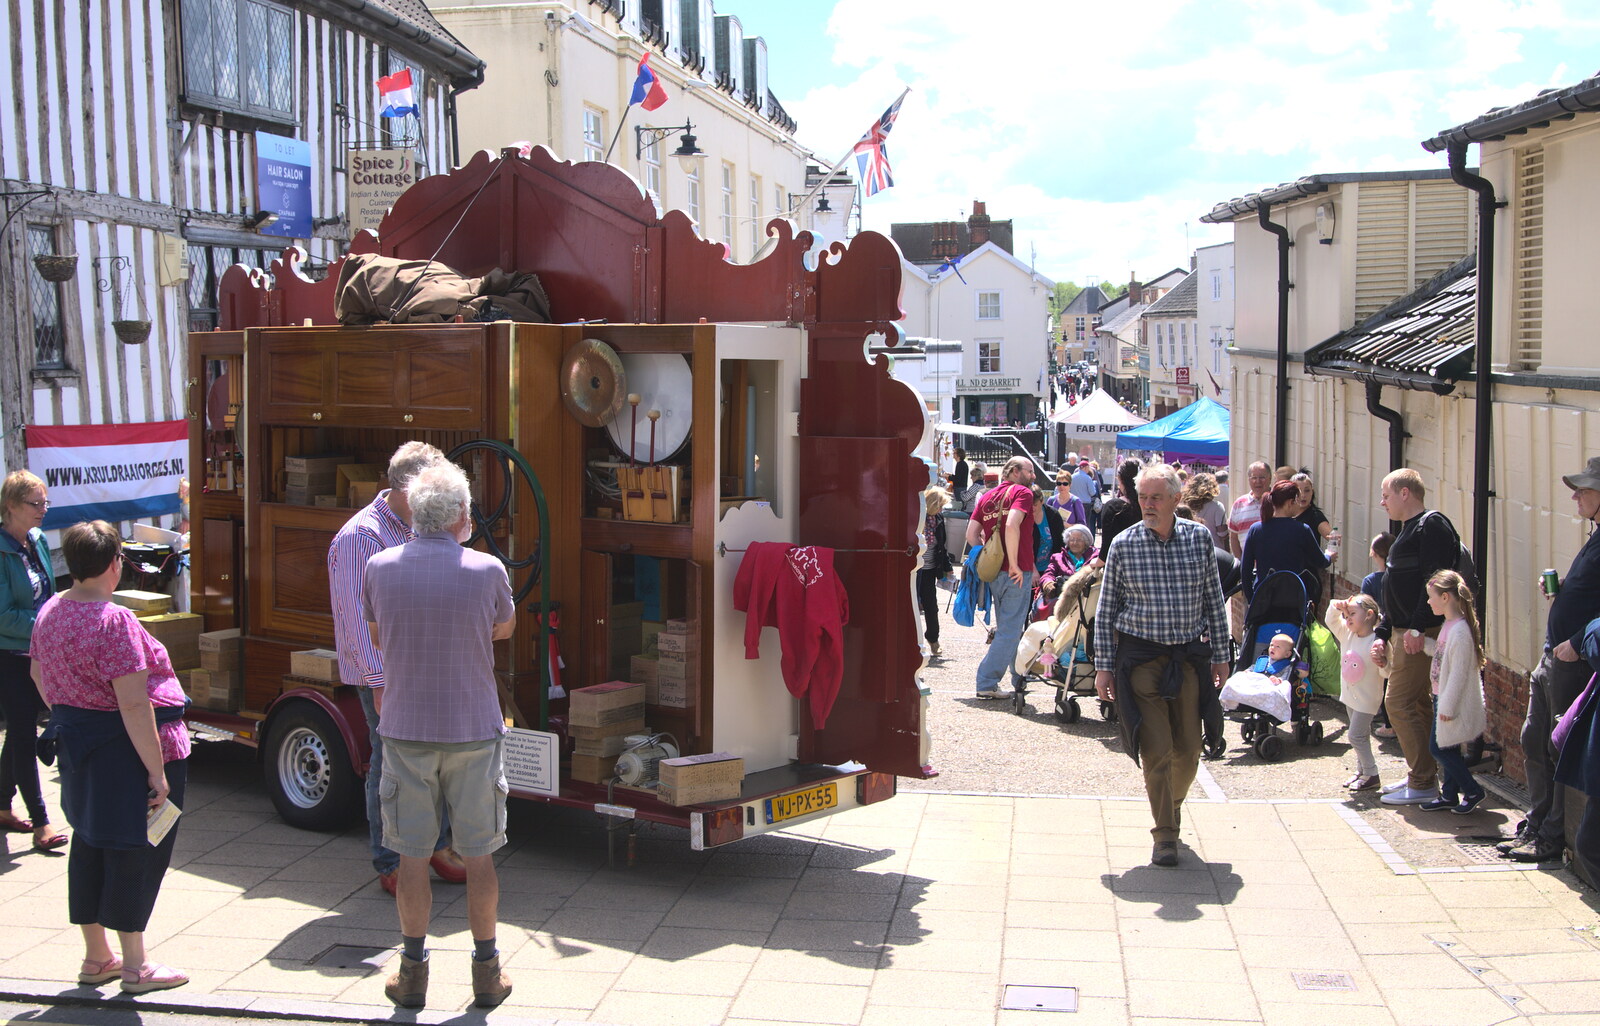 The organ festival at the Market Place in Diss from The Diss Organ Festival, Diss, Norfolk - 14th May 2017